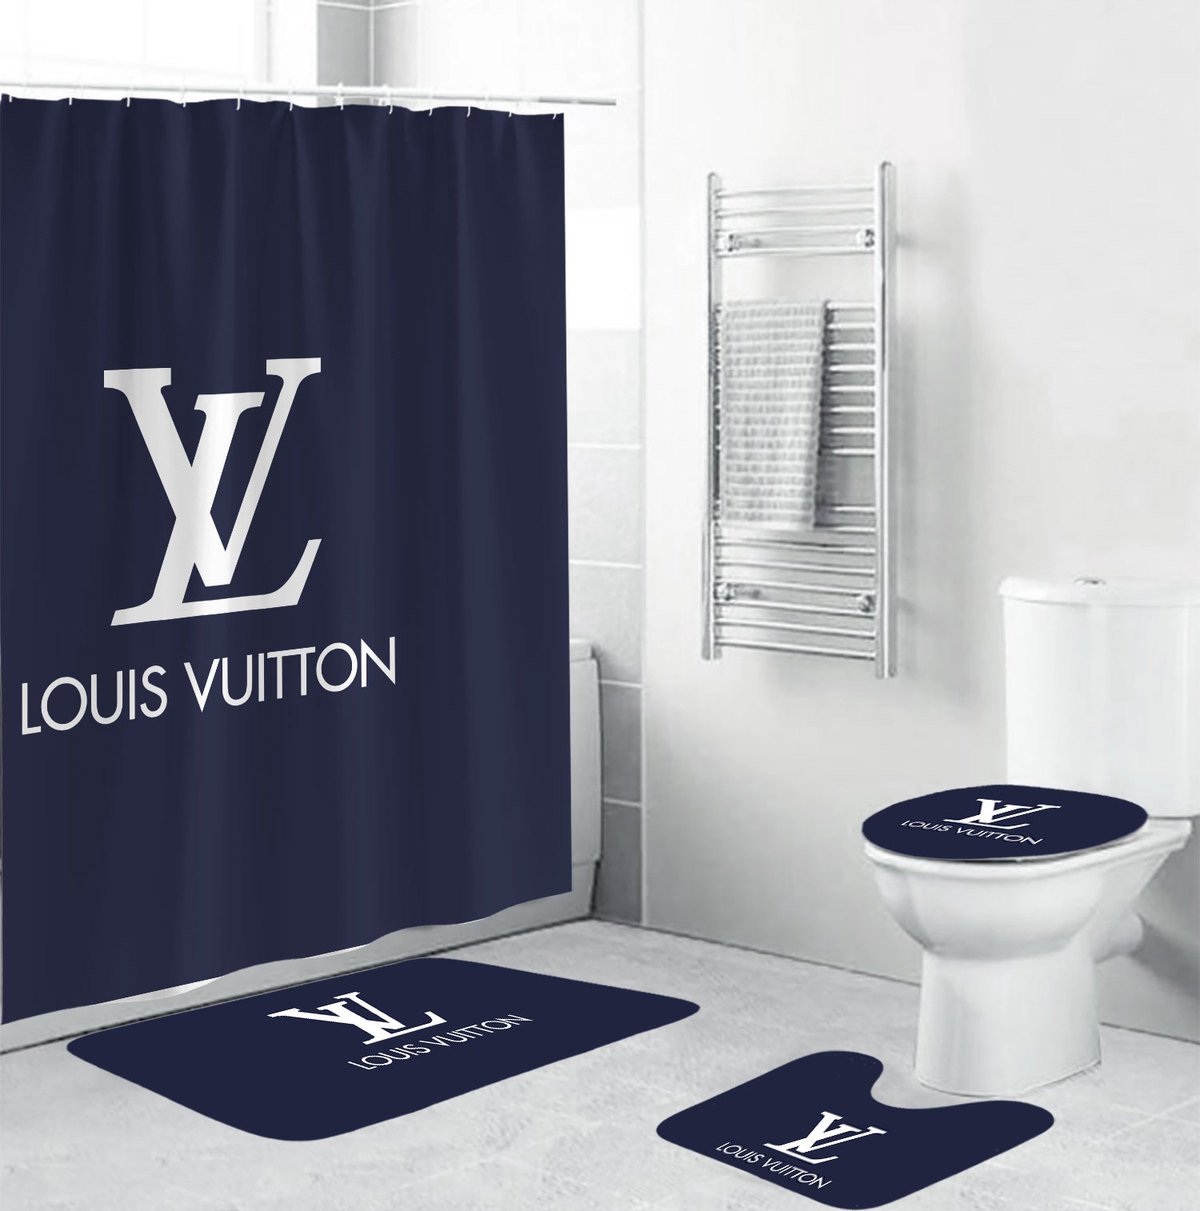 BLV31 Limited Edition 3D Customized Bathroom Sets